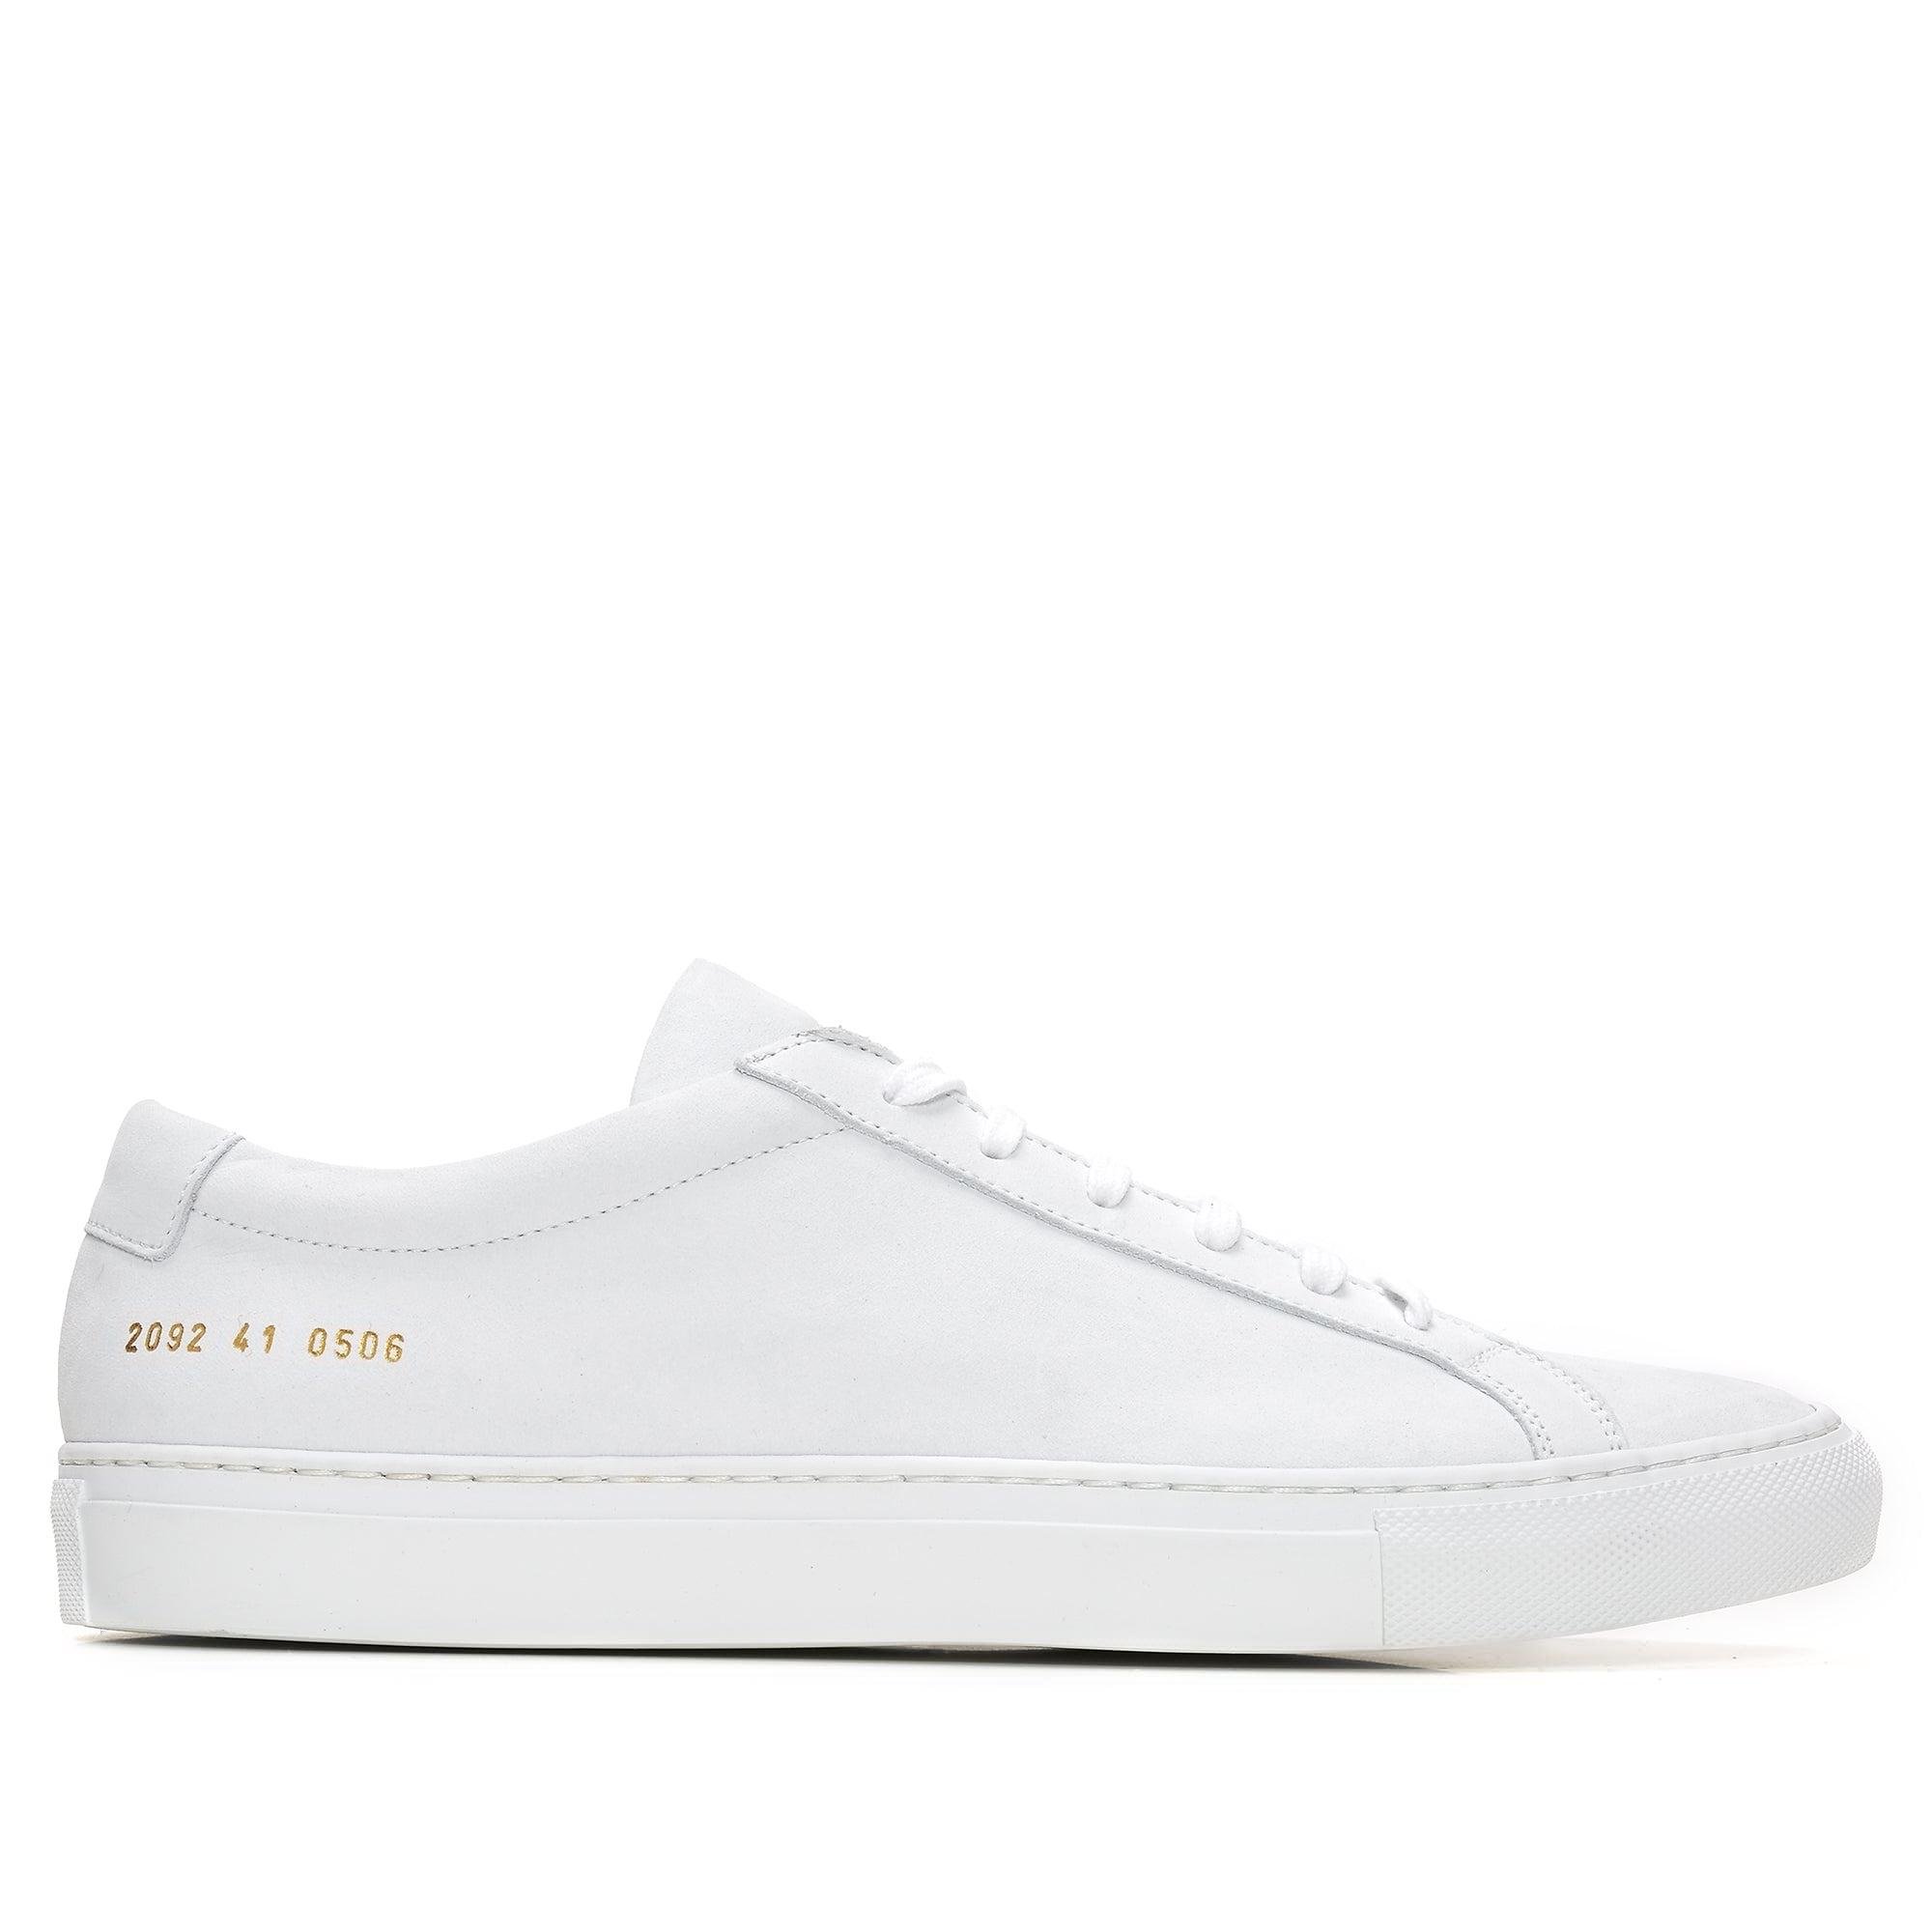 Common Projects - Original Achilles Low - (White) by COMMON PROJECTS